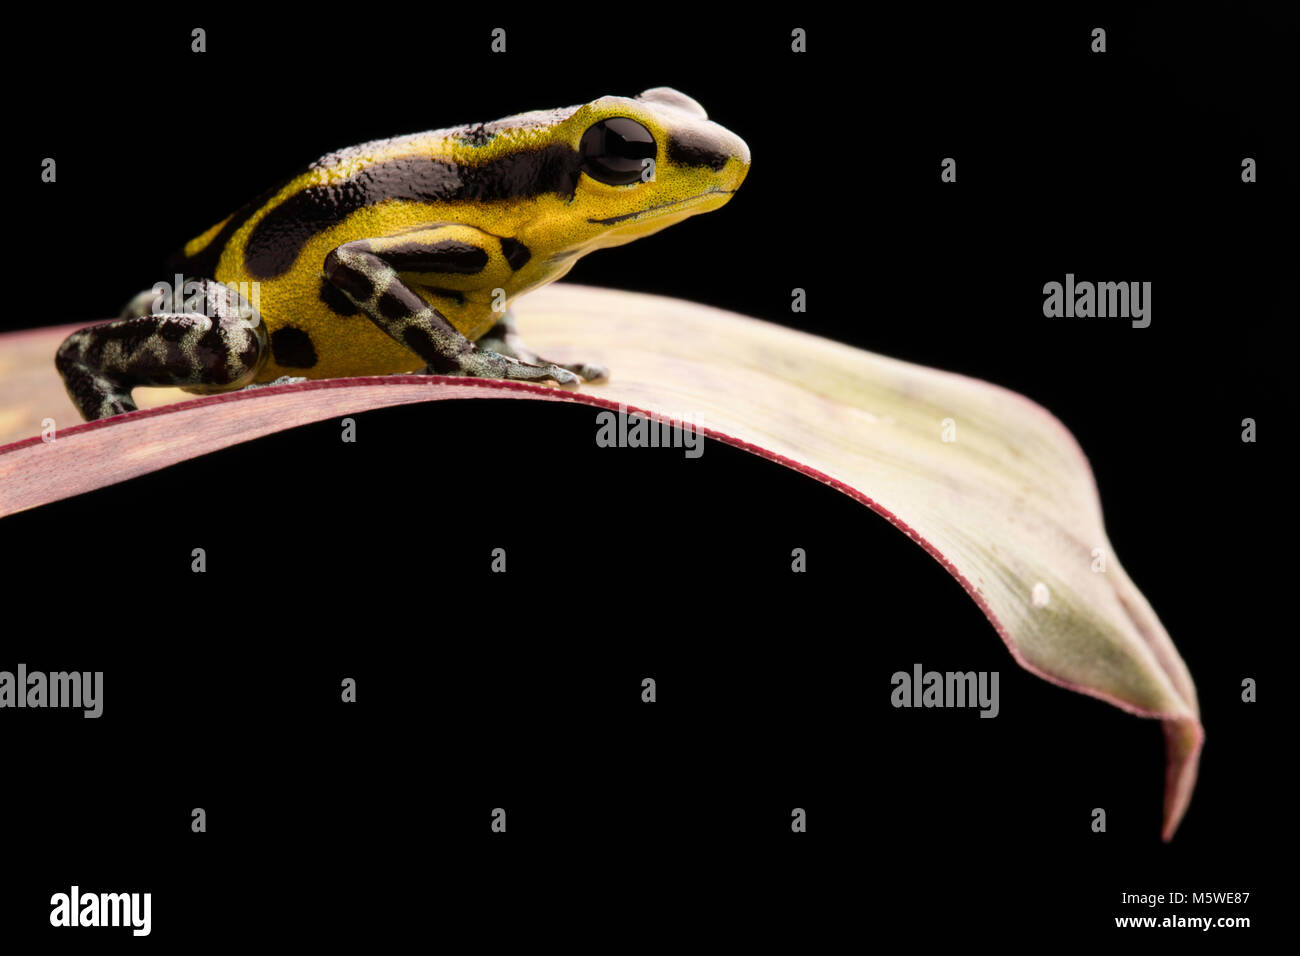 A poisonous poison dart frog, Oophaga pumilio. Macro of a small rain forest animal. Stock Photo